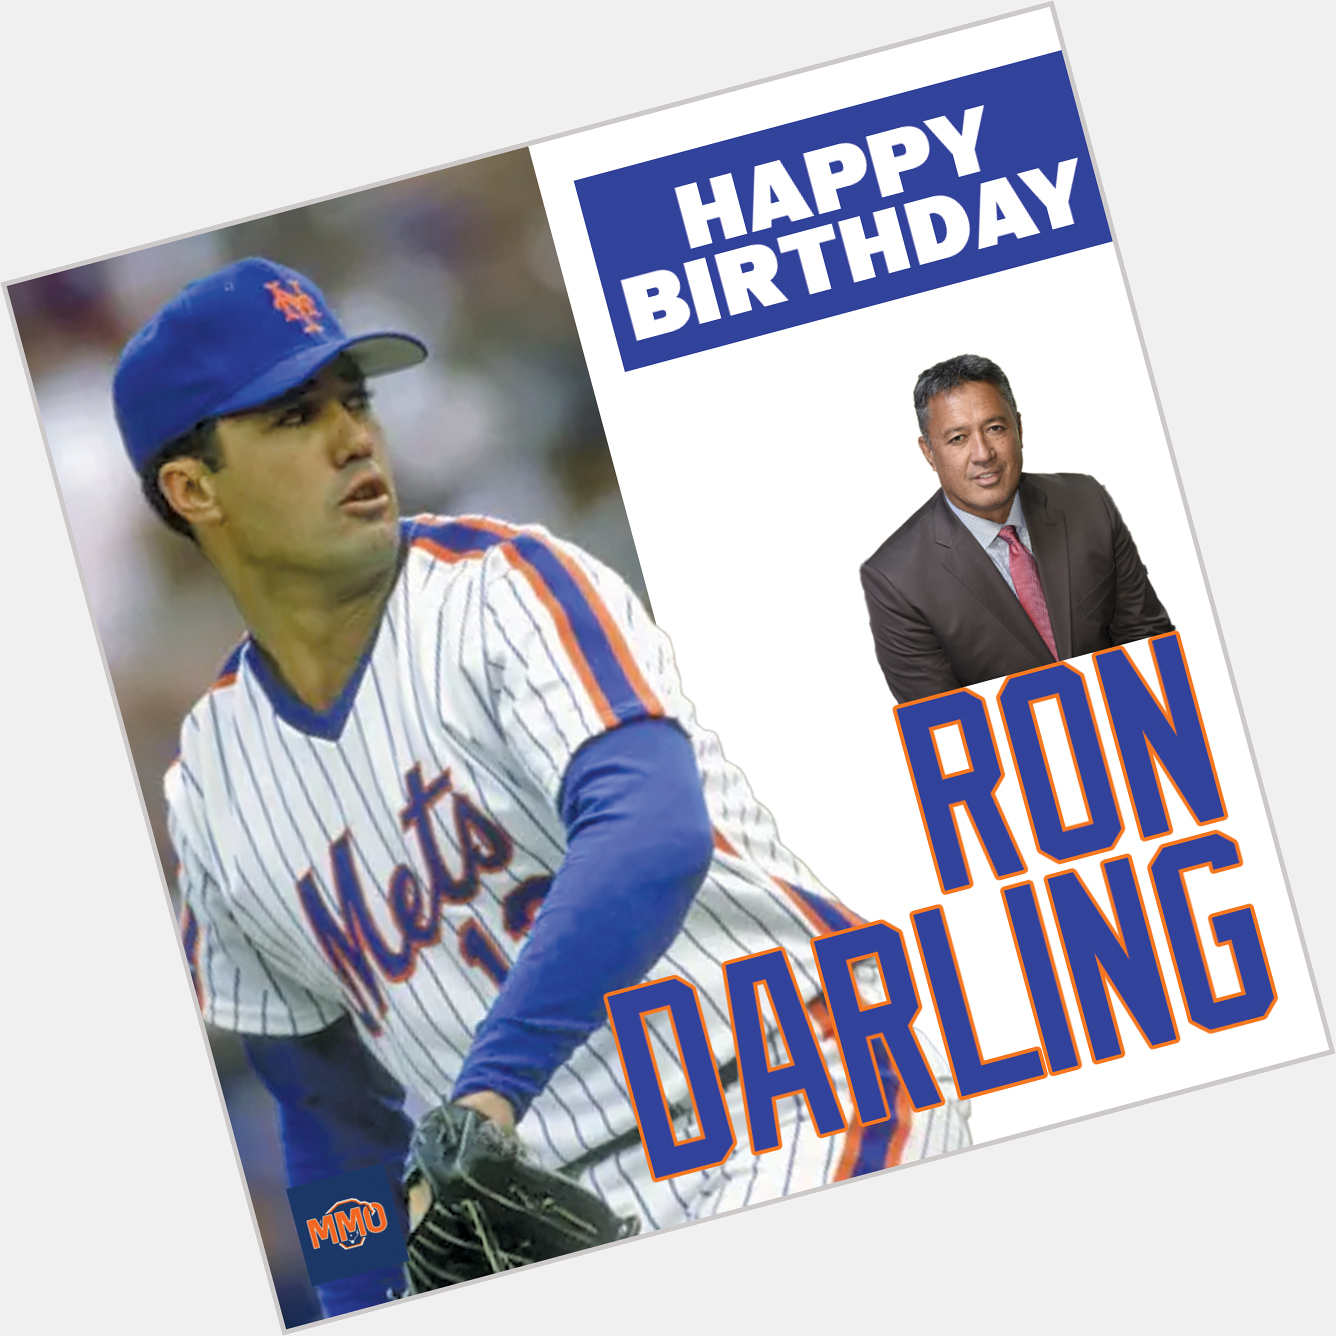 Join us in wishing Ron Darling a very happy 62nd birthday! 